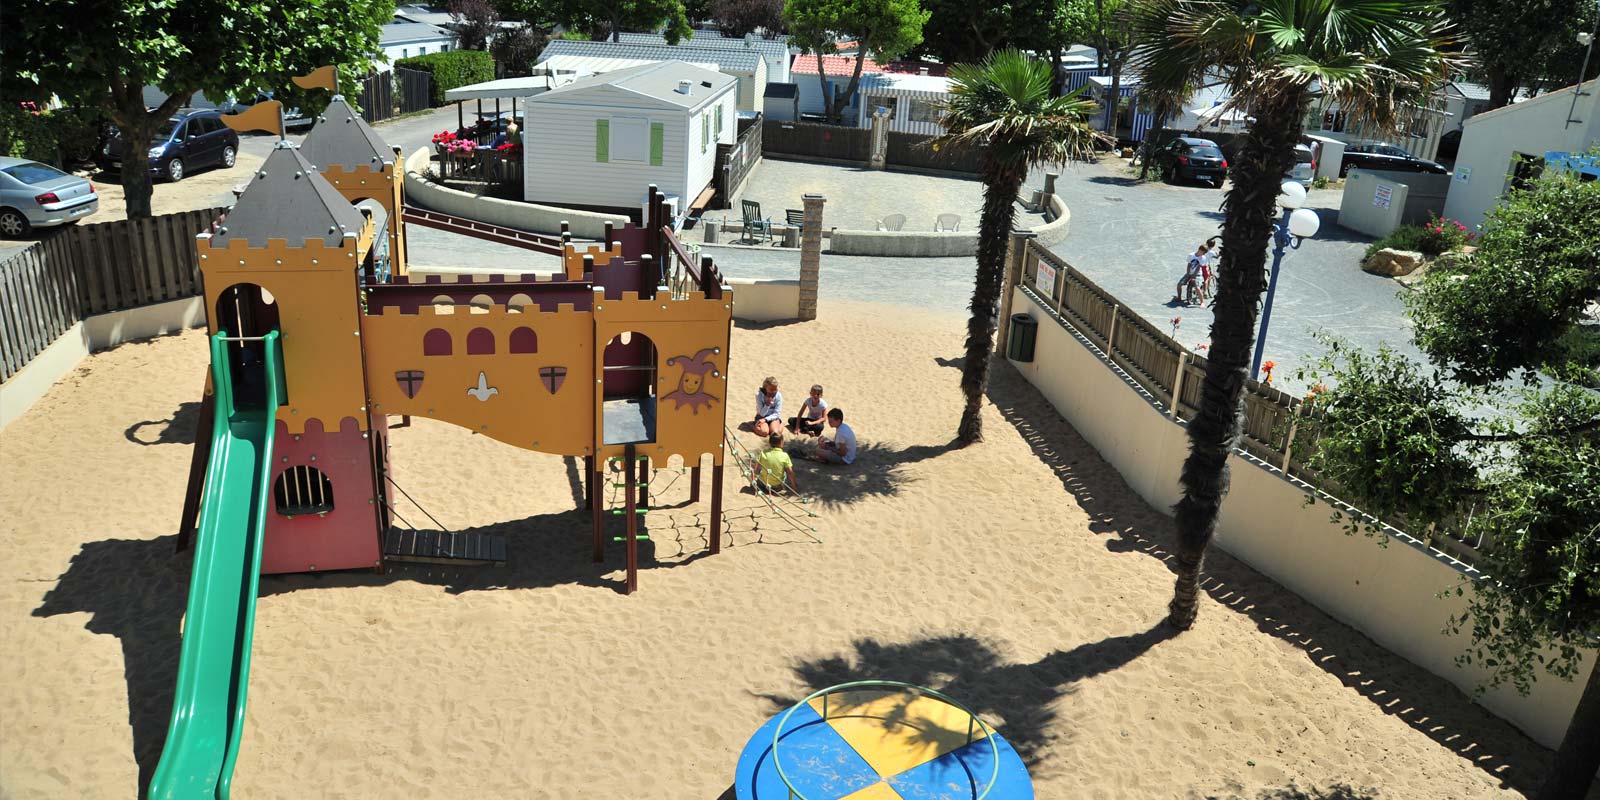 Aerial view of the campsite playground at Saint-Hilaire in Vendée